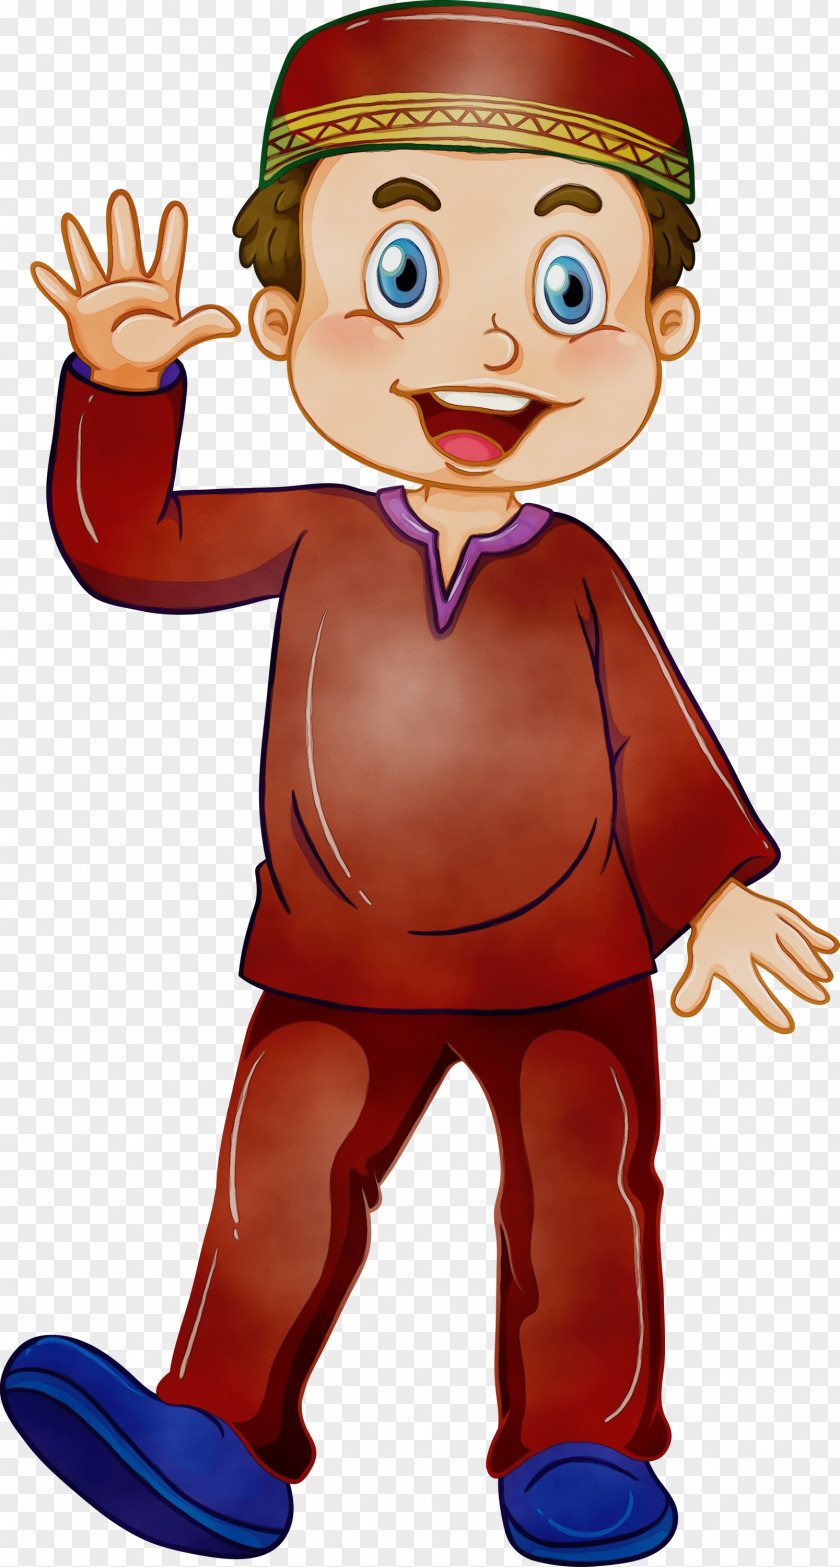 Cartoon Finger Thumb Style PNG